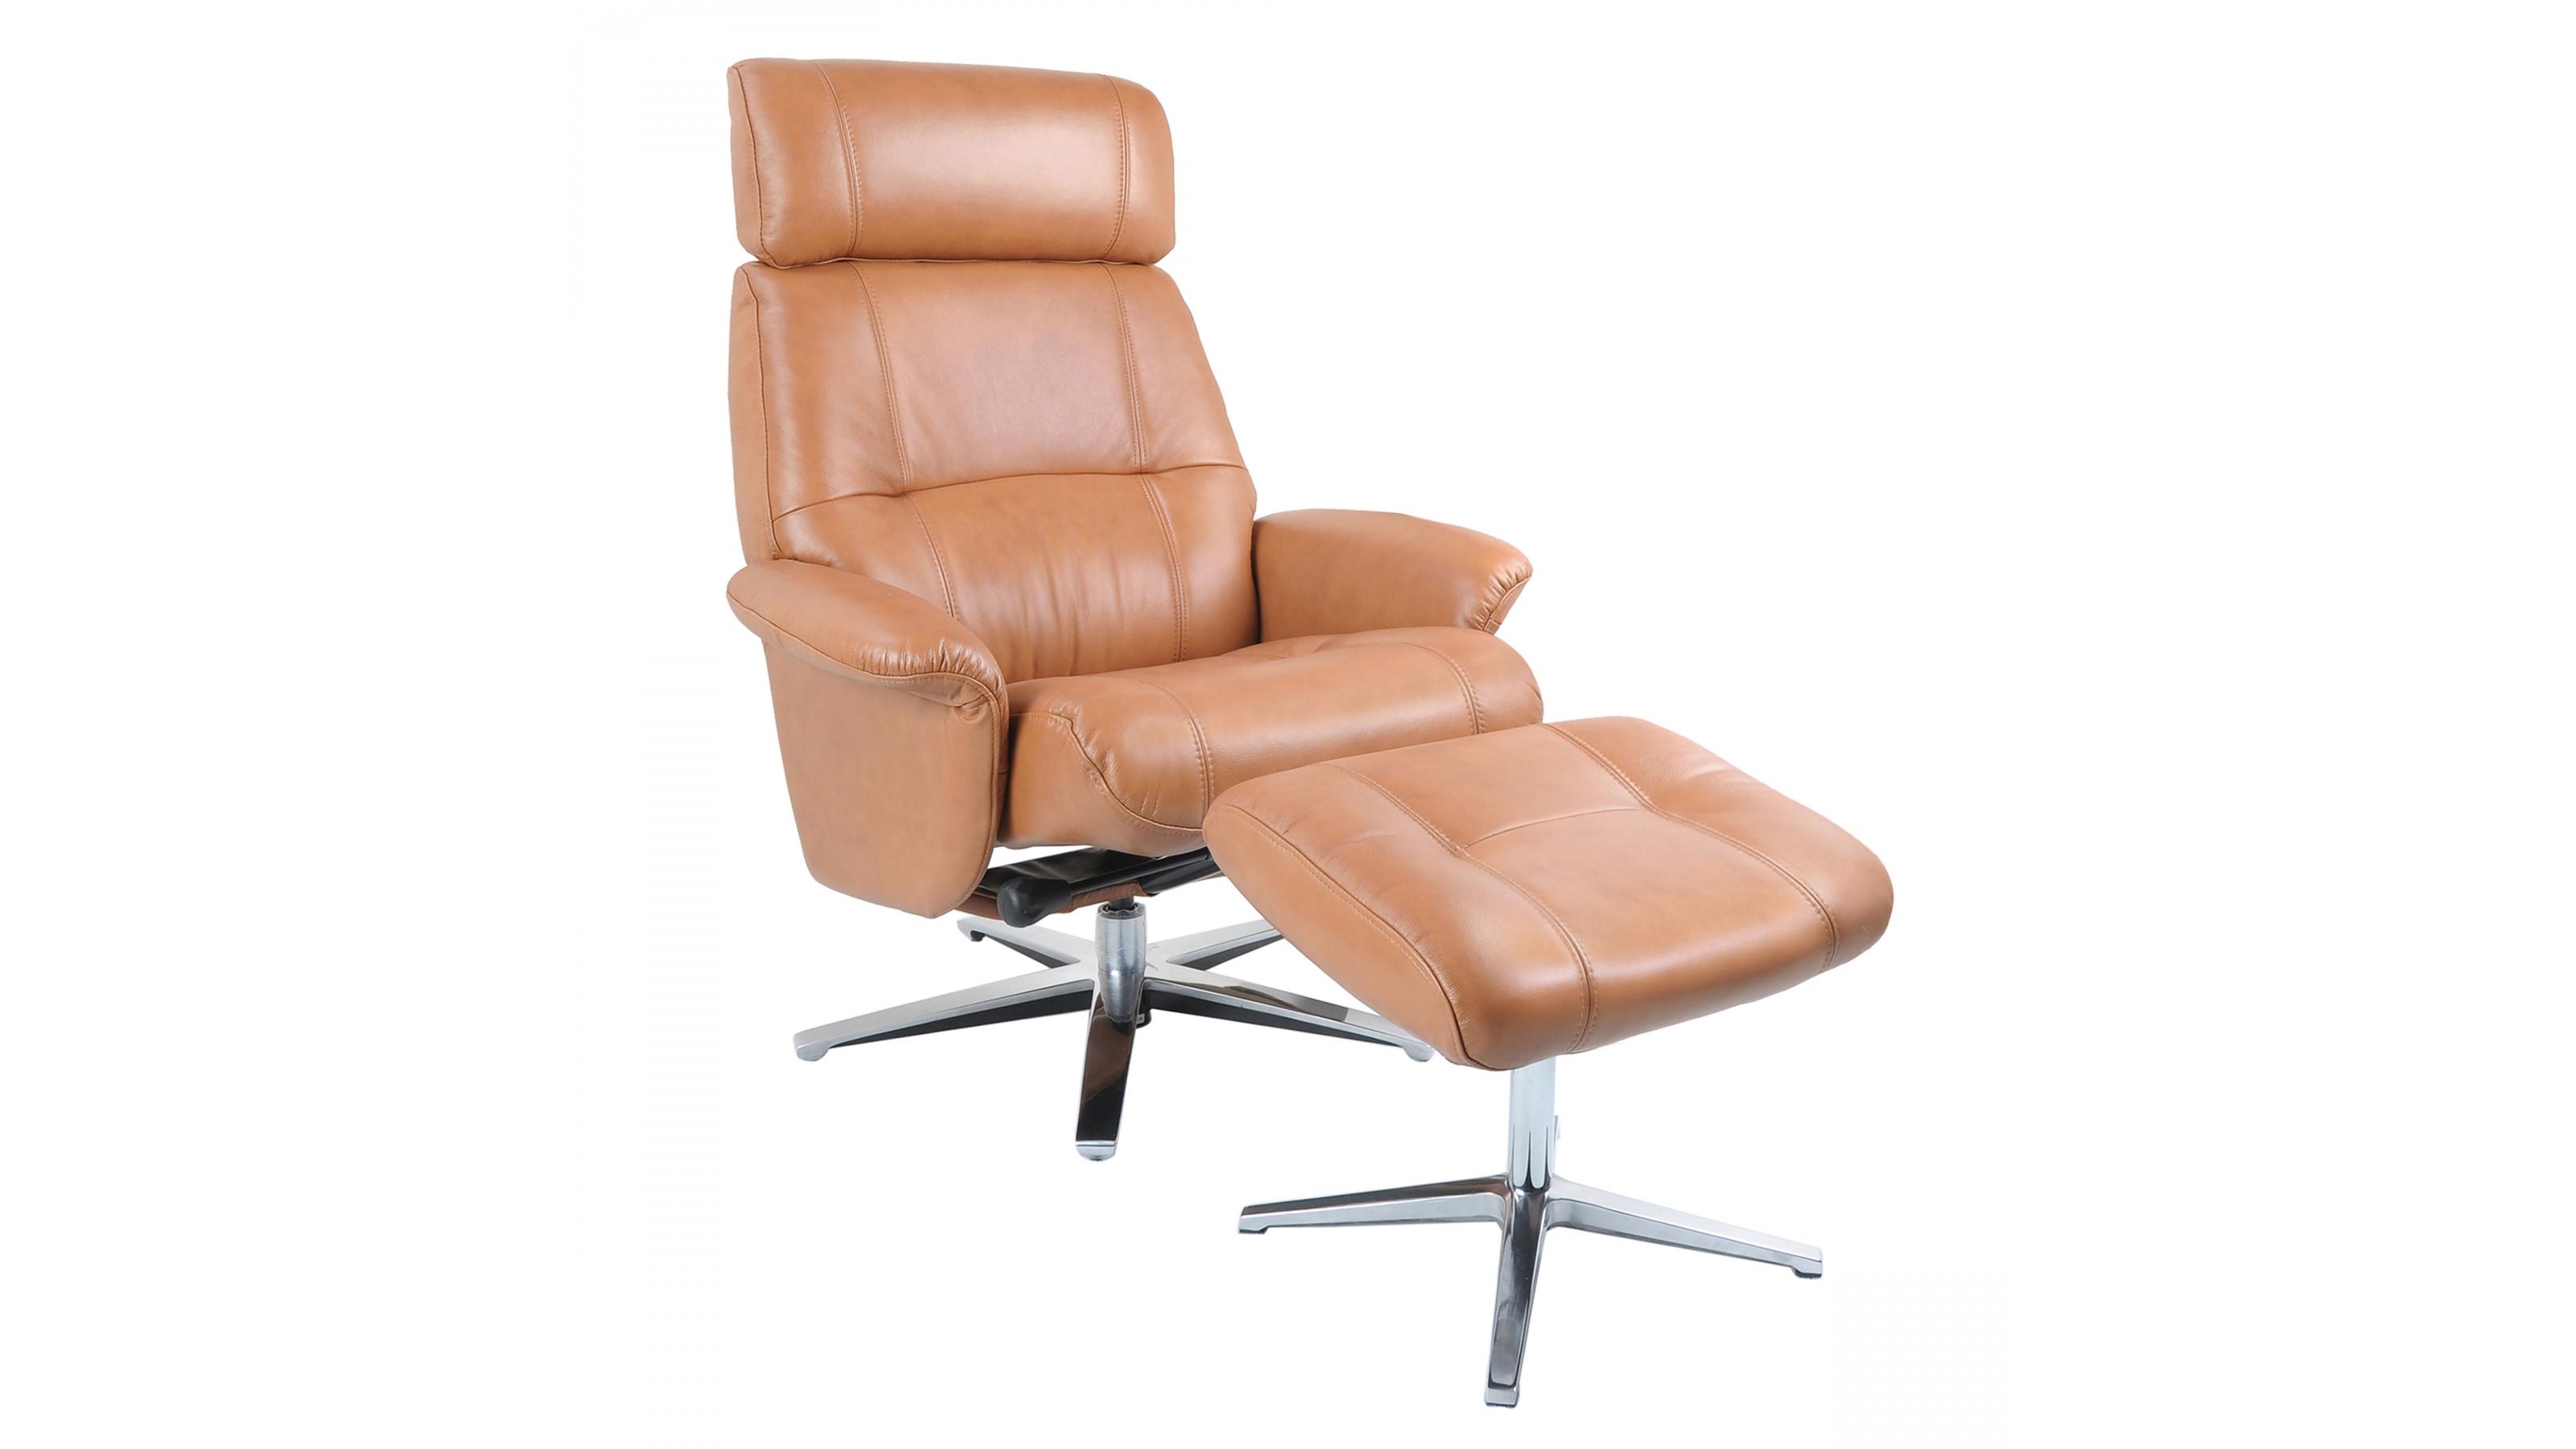 Henri Leather Recliner And Footstool, Recliner Leather Chairs